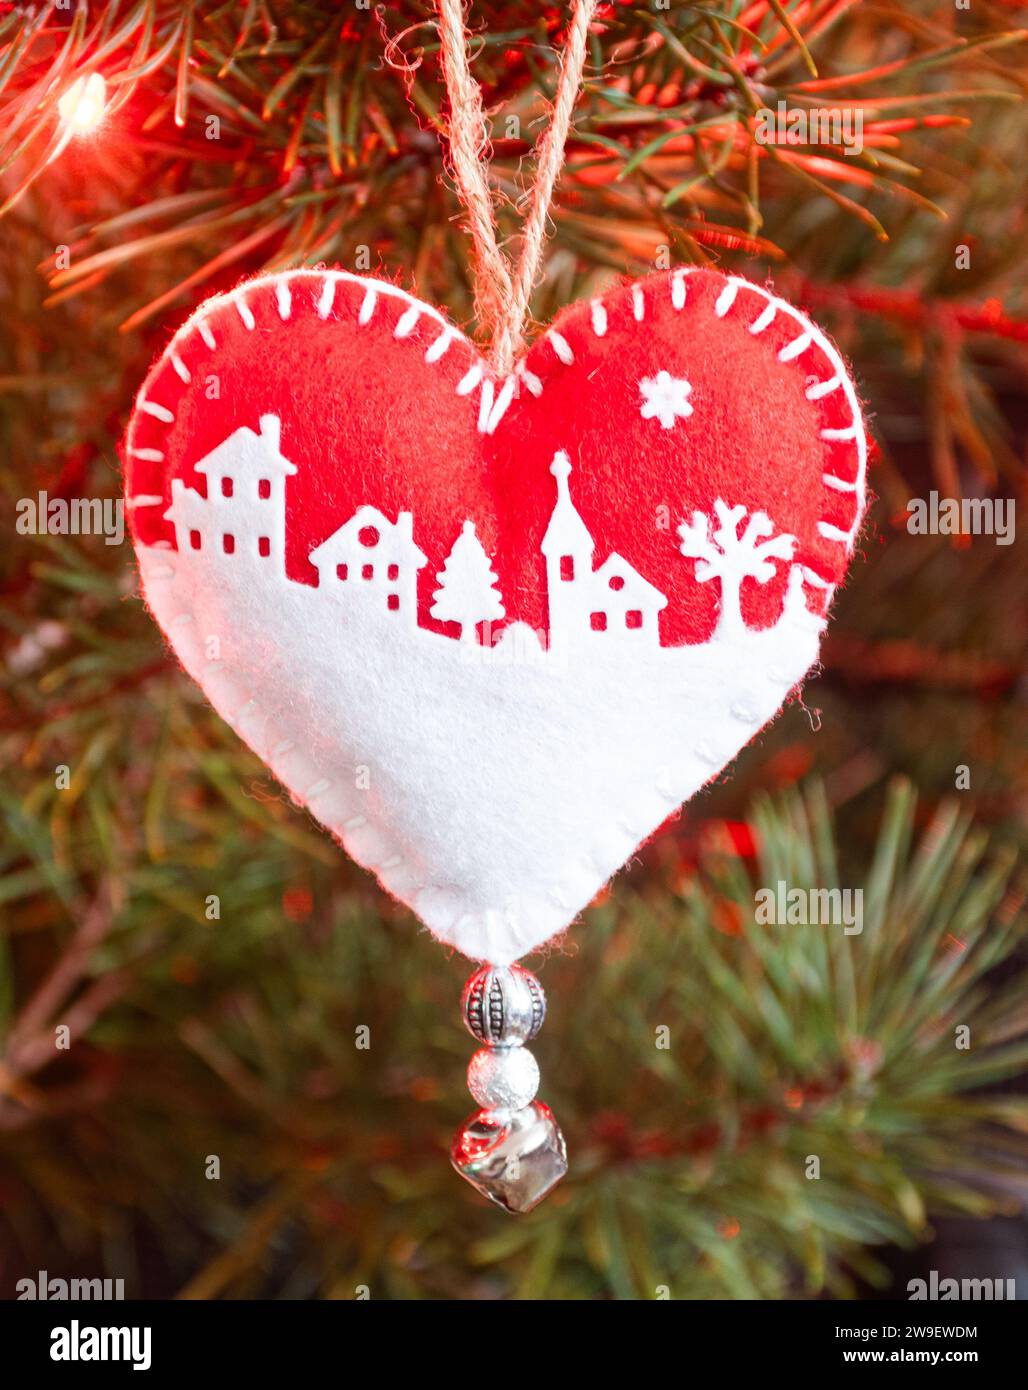 Homemade handicraft felt Christmas tree decorations on a tree with lights, a heart shaped red and white snow scene Stock Photo